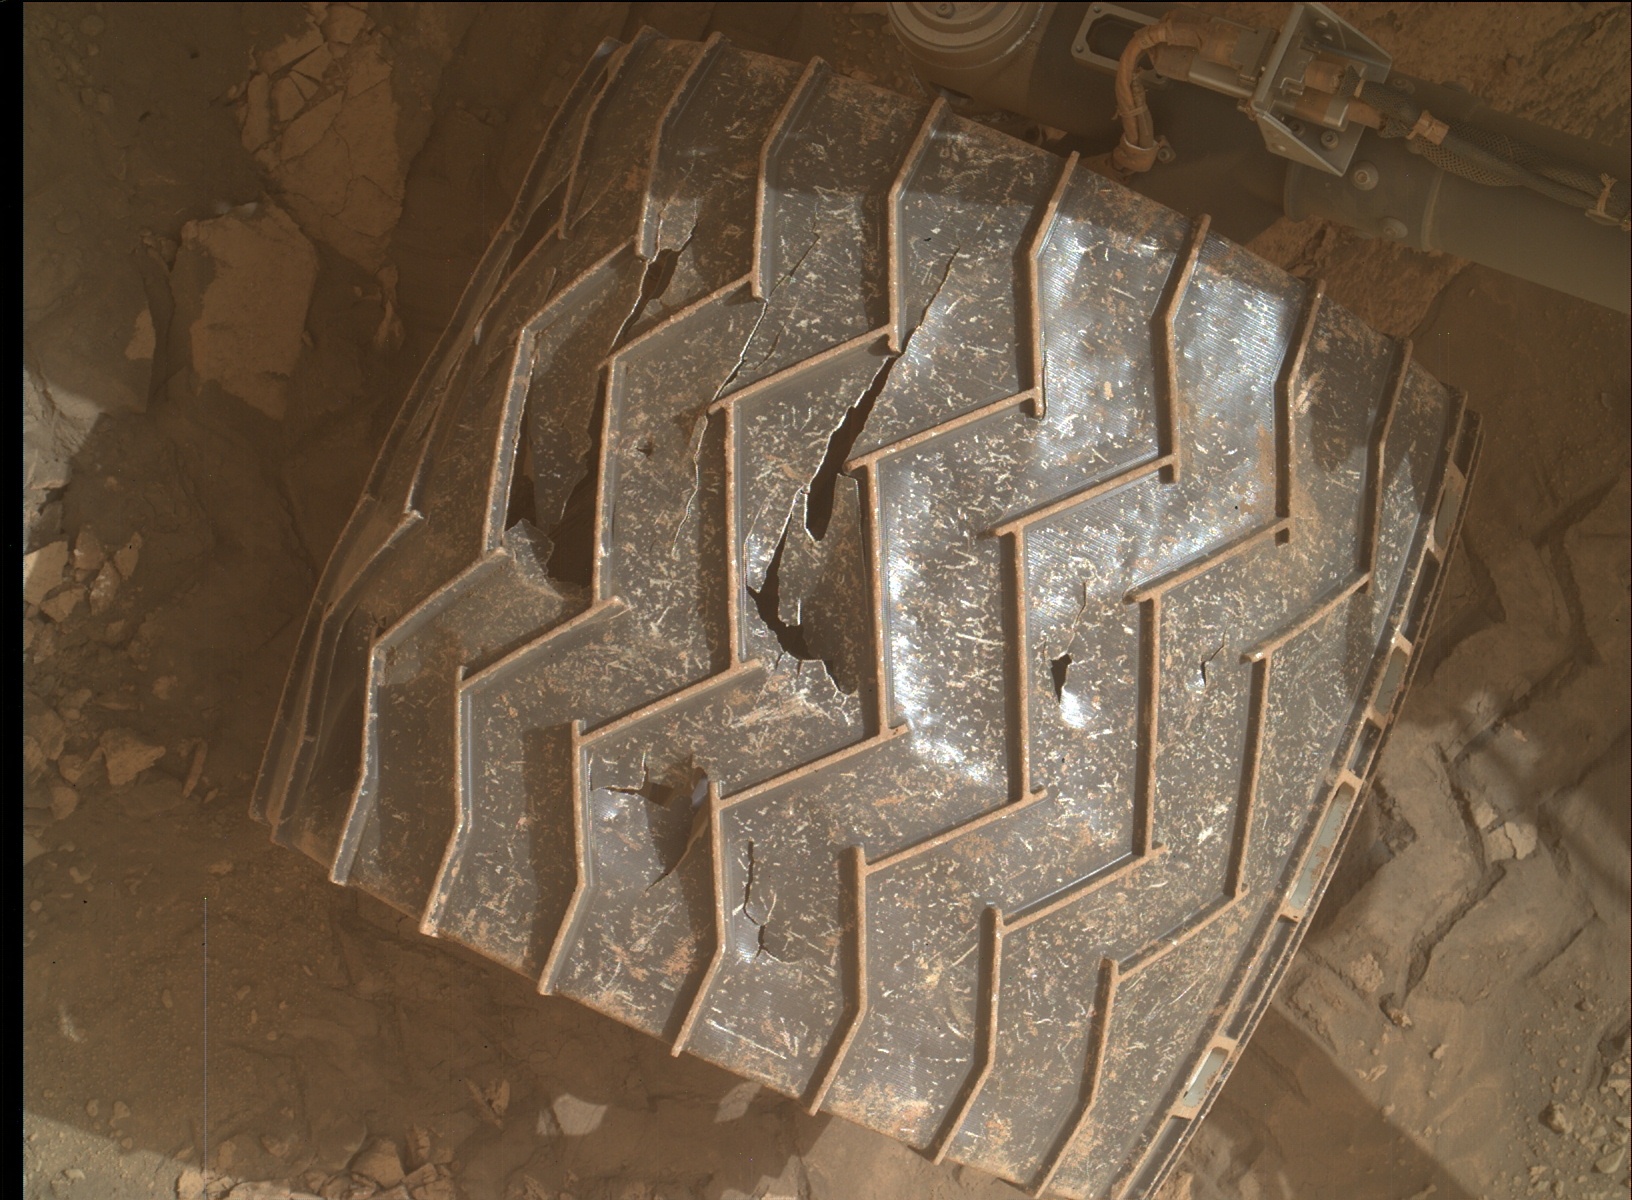 A wheel of the Mars Curiosity rover showing damage from rugged terrain